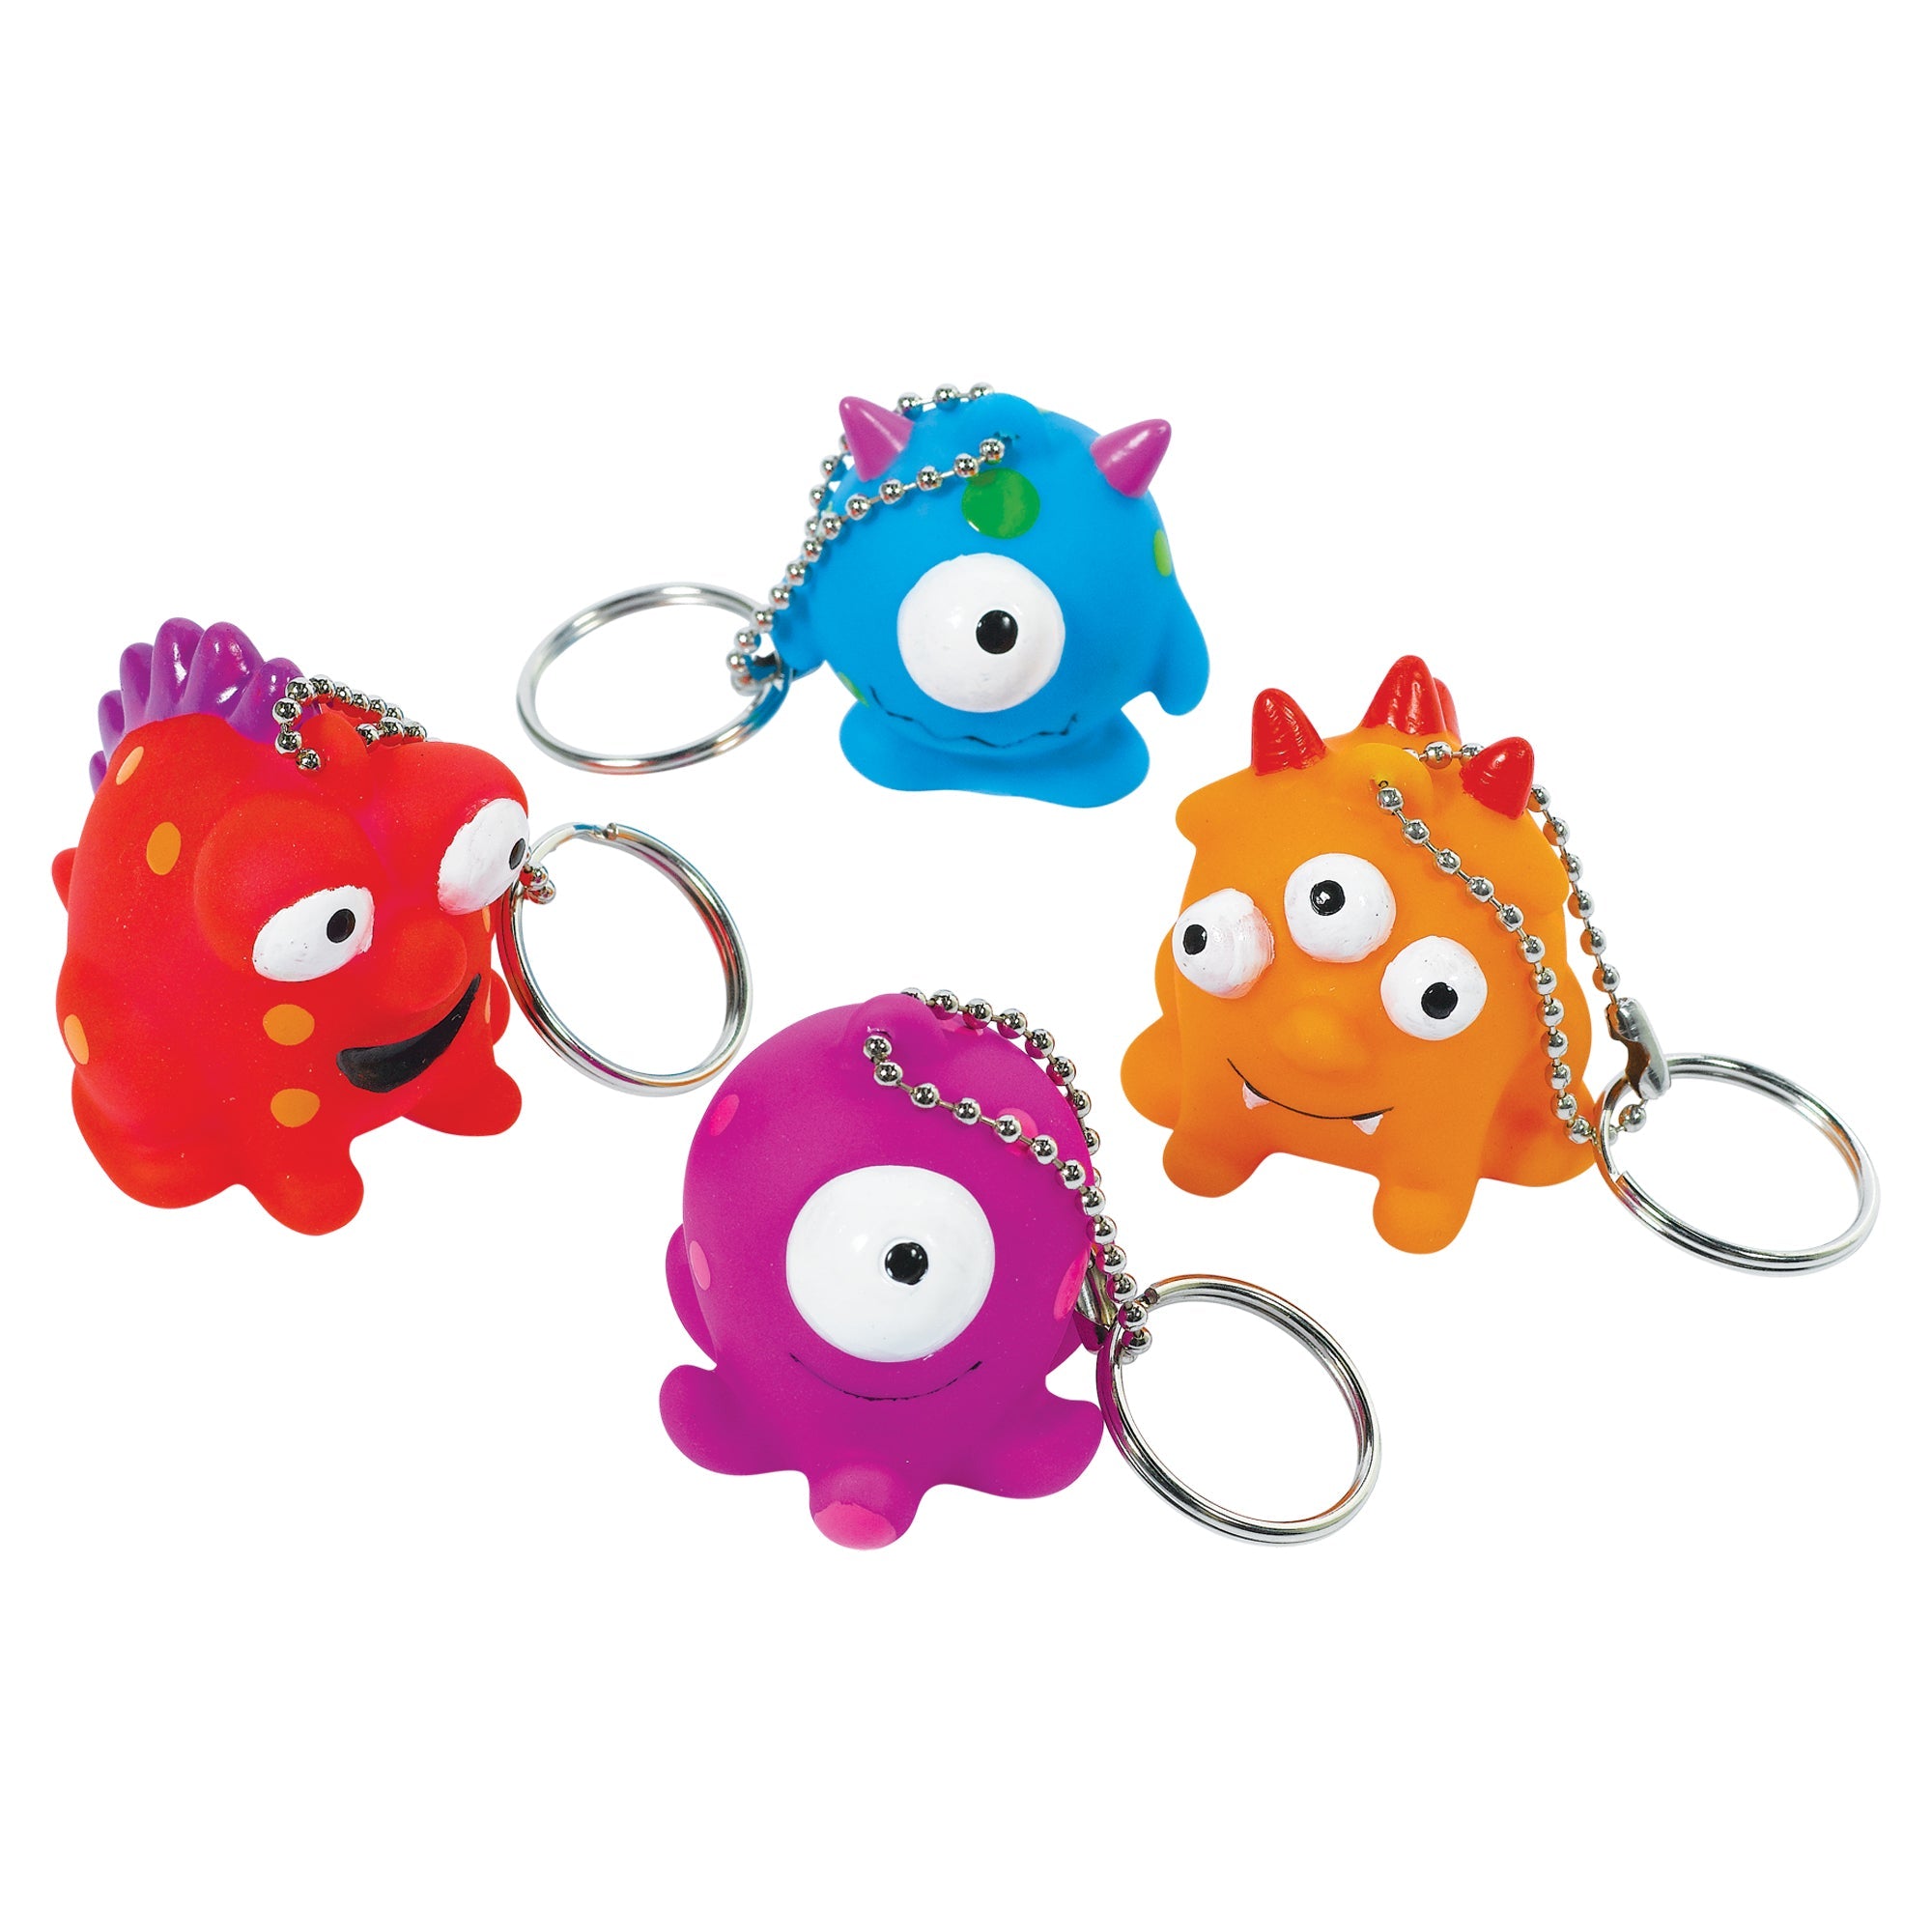 12 Monster Keychains  1.75x1.5in